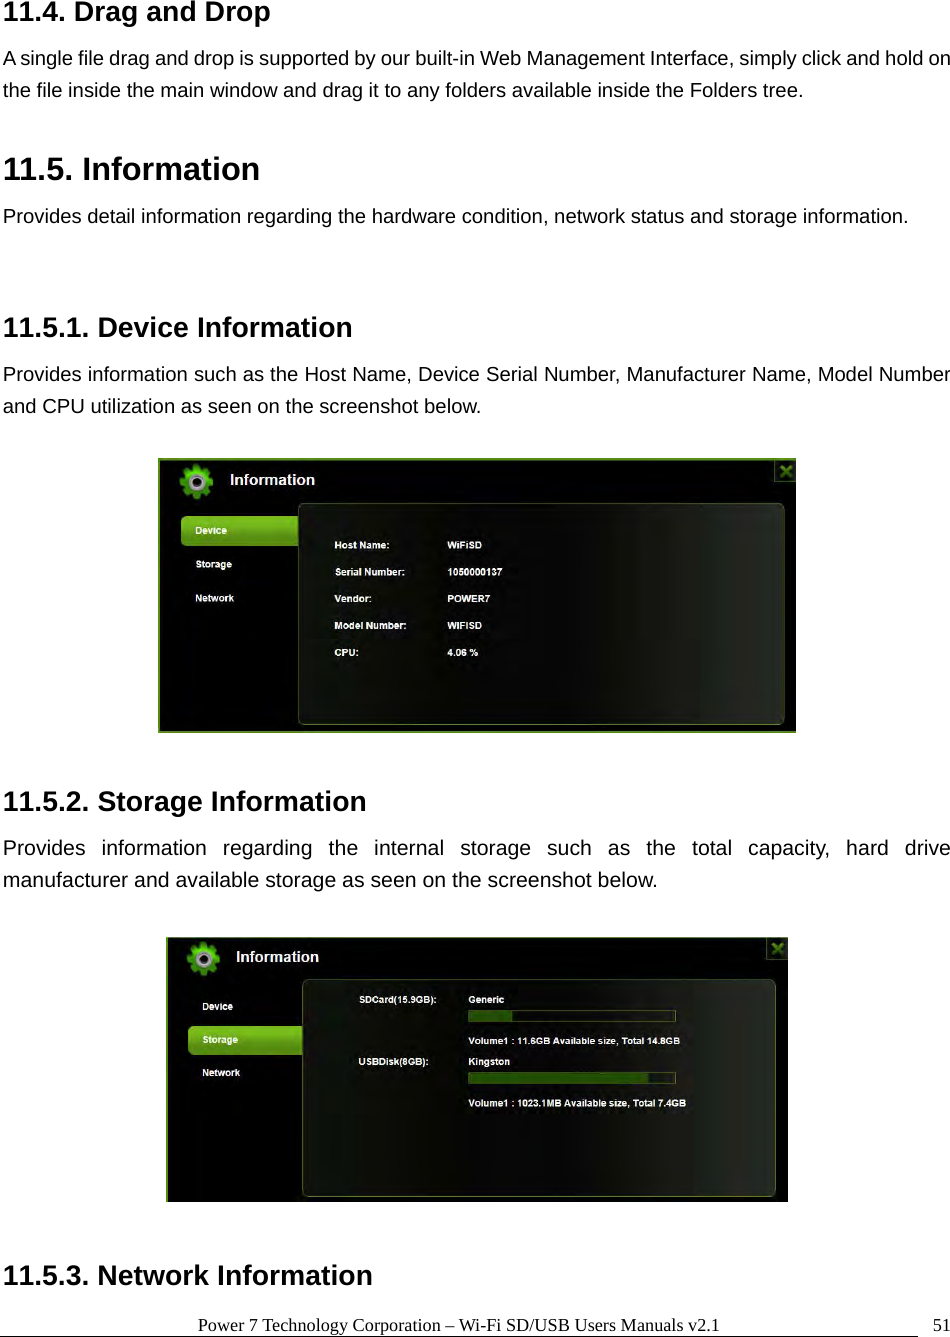 Power 7 Technology Corporation – Wi-Fi SD/USB Users Manuals v2.1  5111.4. Drag and Drop A single file drag and drop is supported by our built-in Web Management Interface, simply click and hold on the file inside the main window and drag it to any folders available inside the Folders tree.    11.5. Information Provides detail information regarding the hardware condition, network status and storage information.  11.5.1. Device Information Provides information such as the Host Name, Device Serial Number, Manufacturer Name, Model Number and CPU utilization as seen on the screenshot below.      11.5.2. Storage Information Provides information regarding the internal storage such as the total capacity, hard drive manufacturer and available storage as seen on the screenshot below.    11.5.3. Network Information 